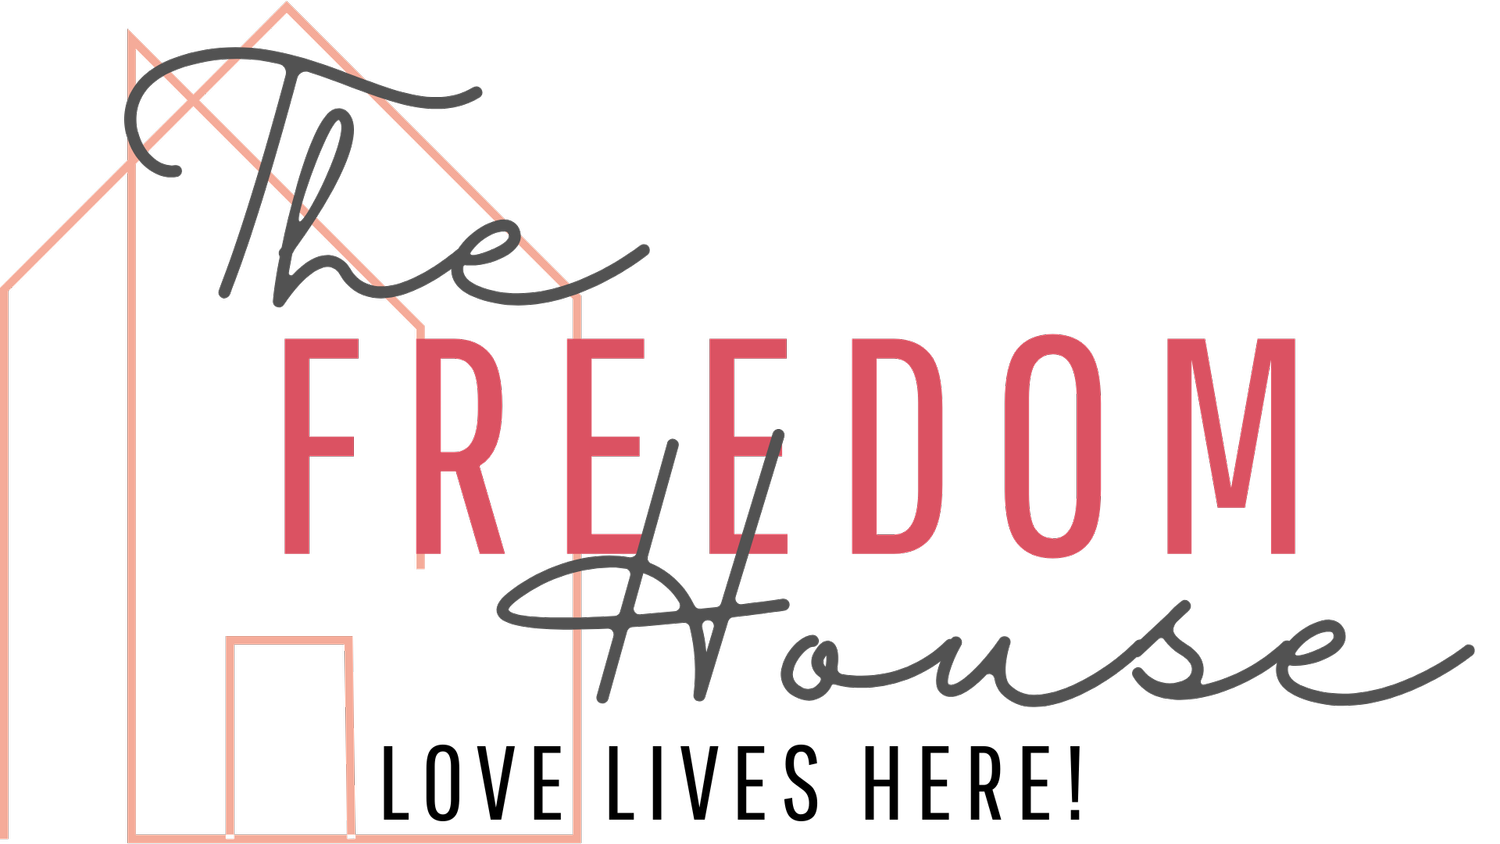 The Freedom House